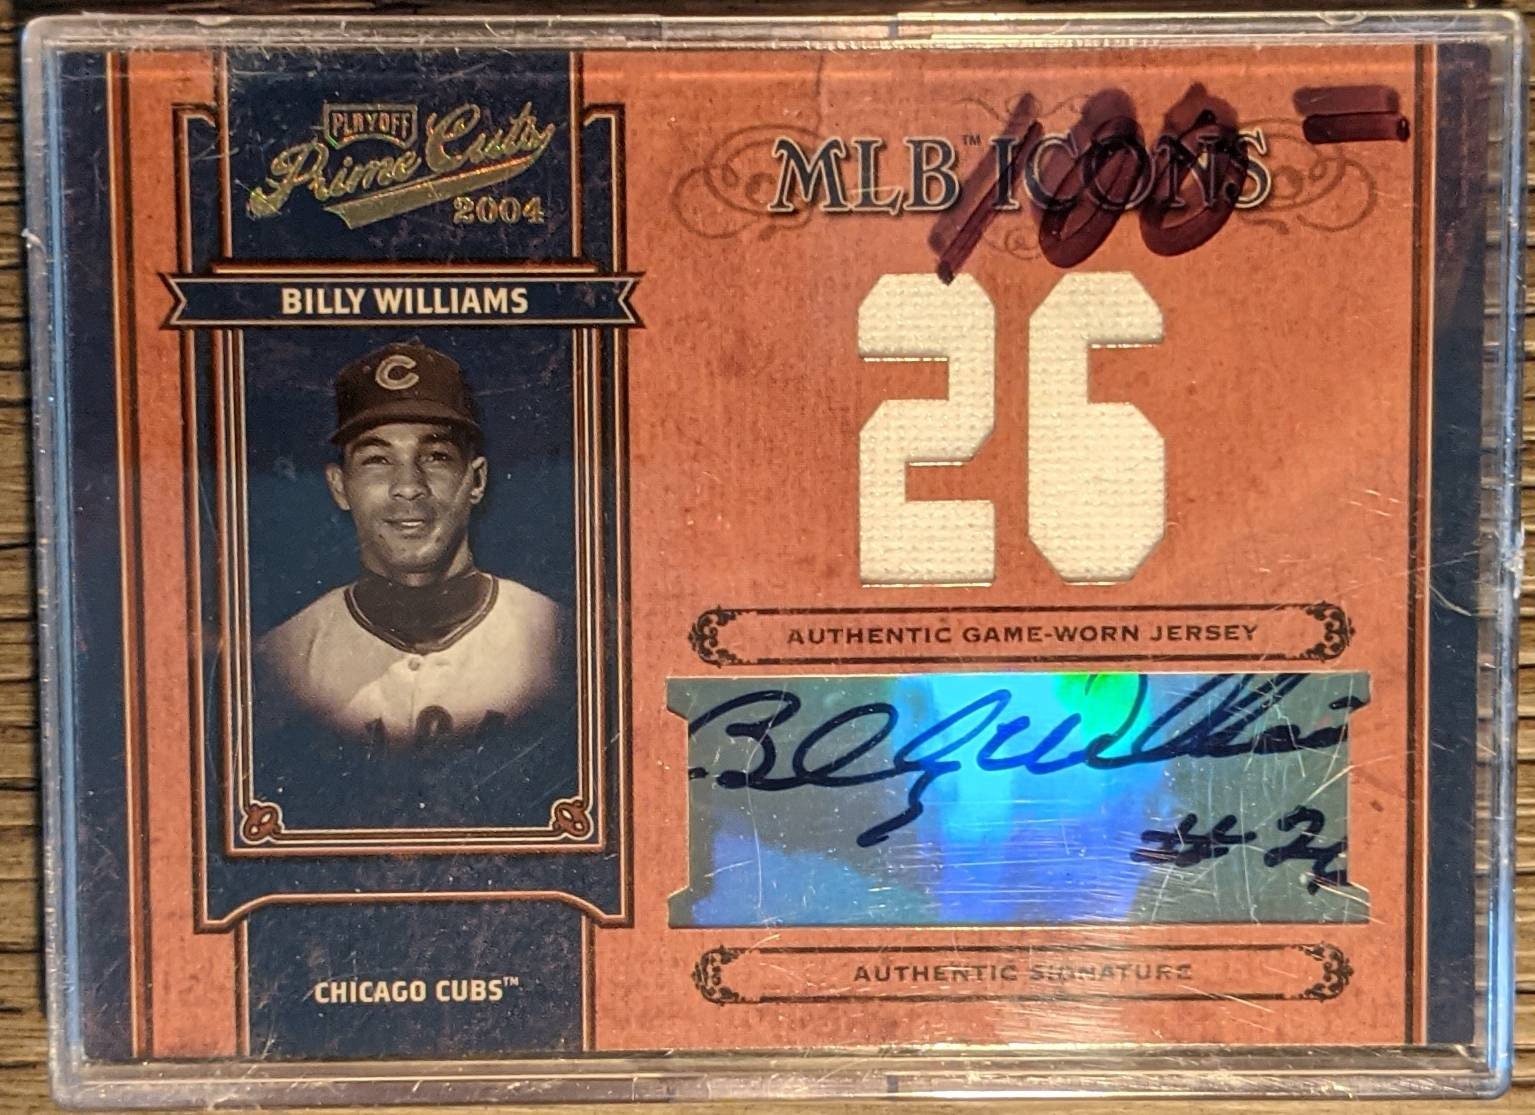 Billy Williams Prime Cuts Auto Jersey Patch Card Authentic Game Used Relics  Limited to 10/26 Chicago Cubs High Grade Donruss Baseball